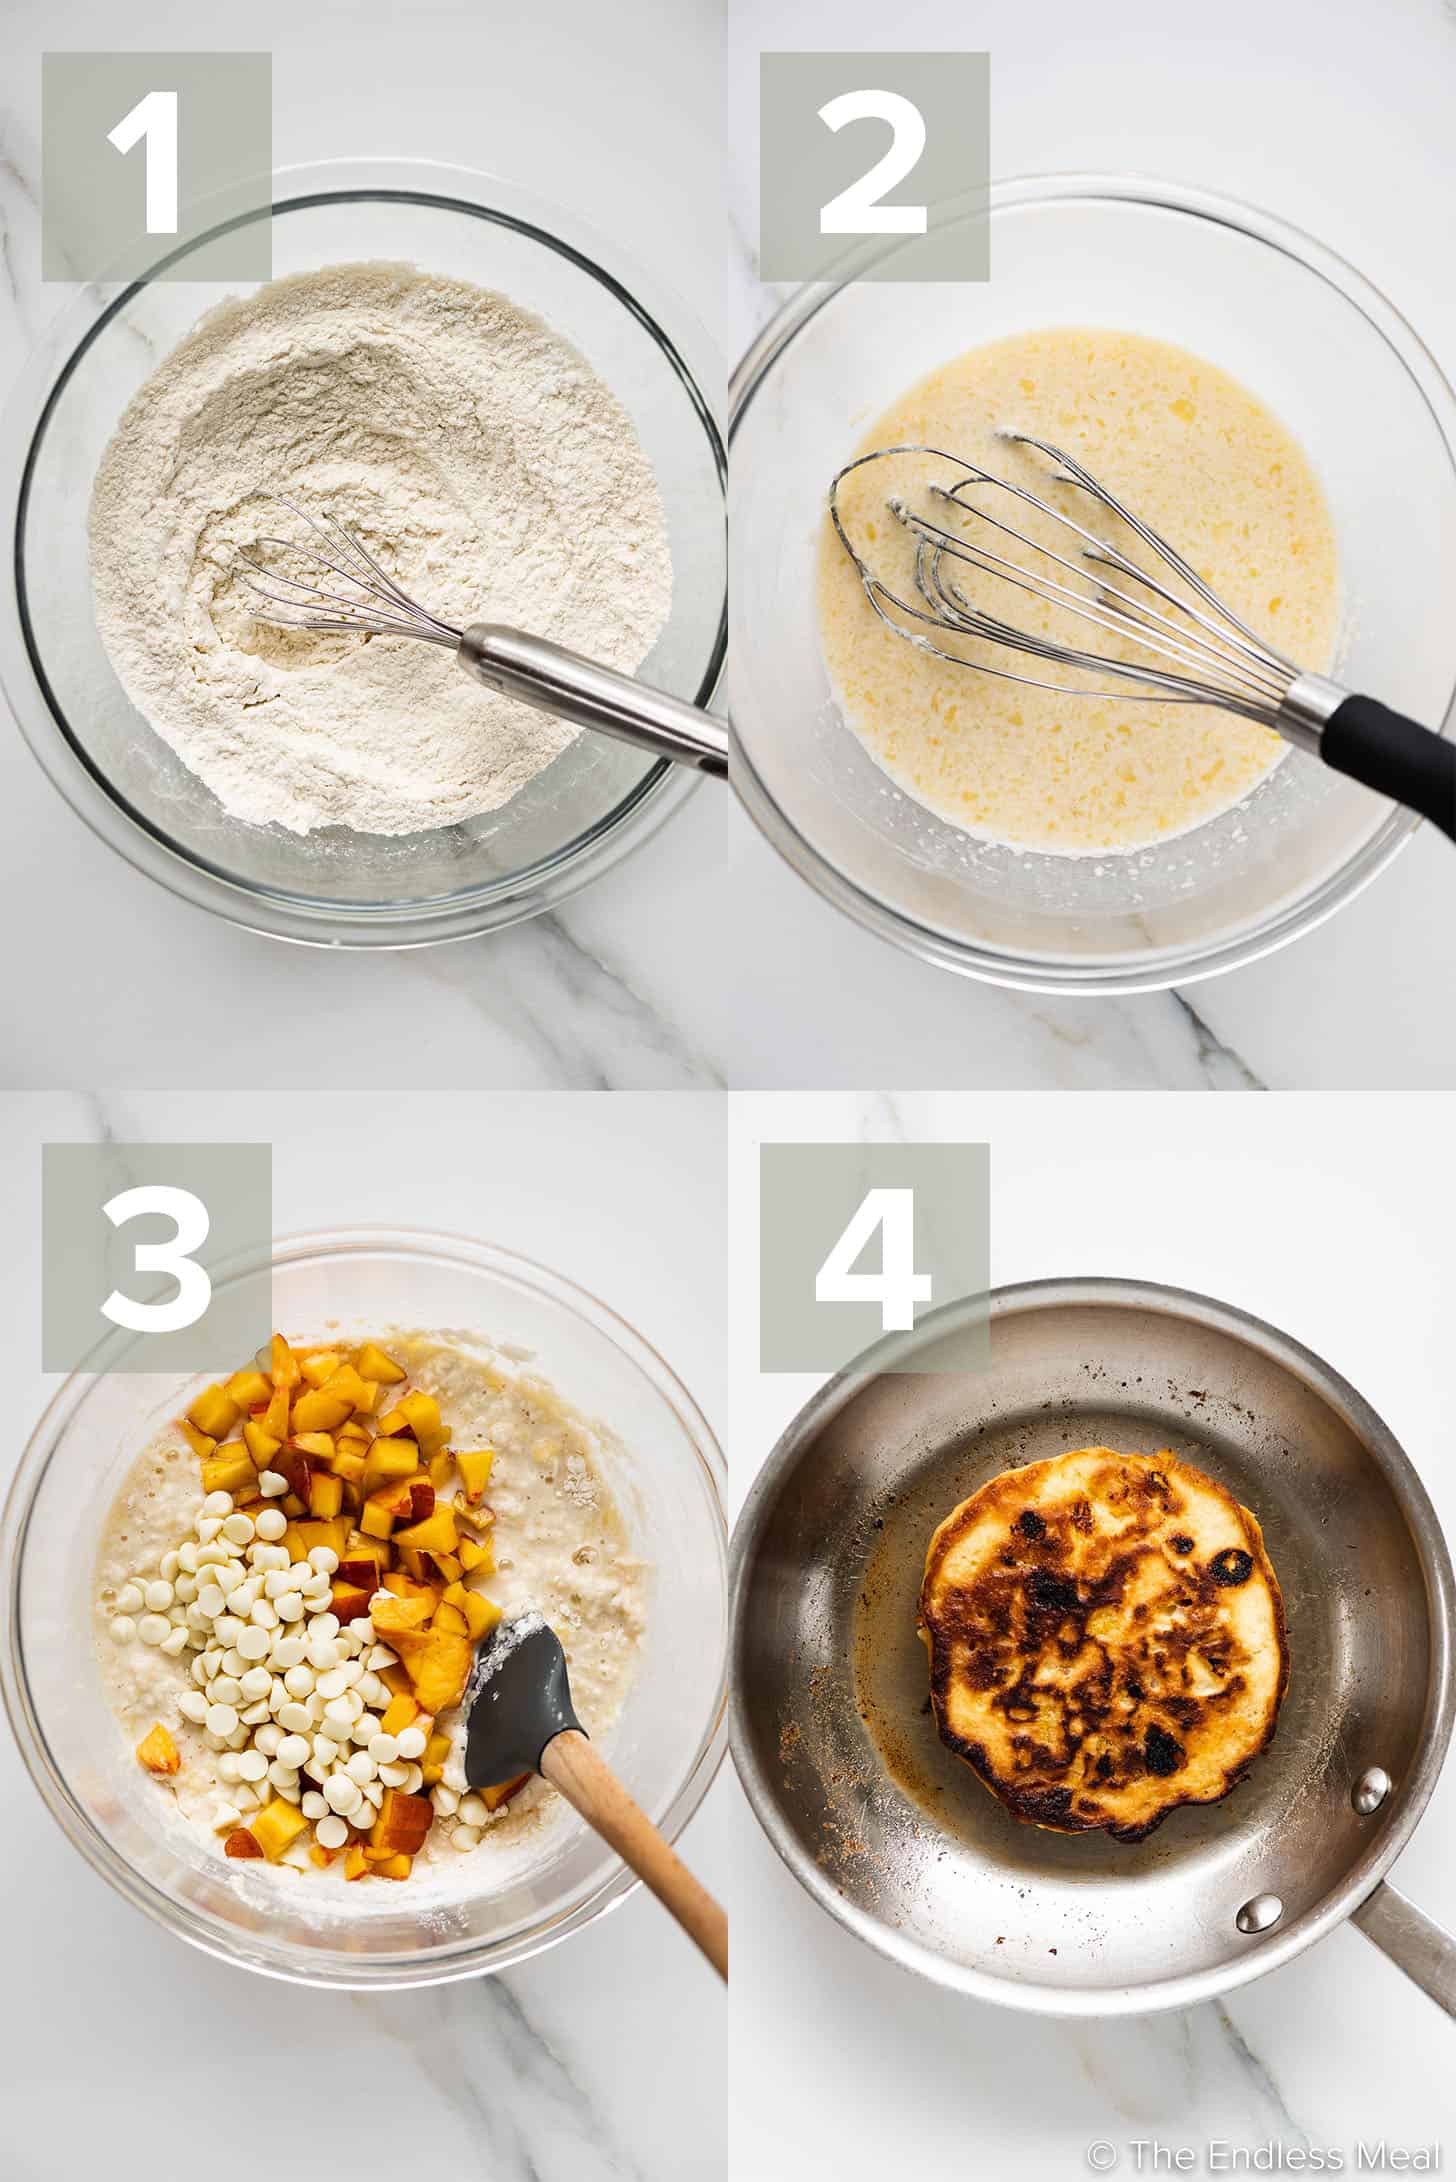 4 pictures showing how to make Peach Pancakes